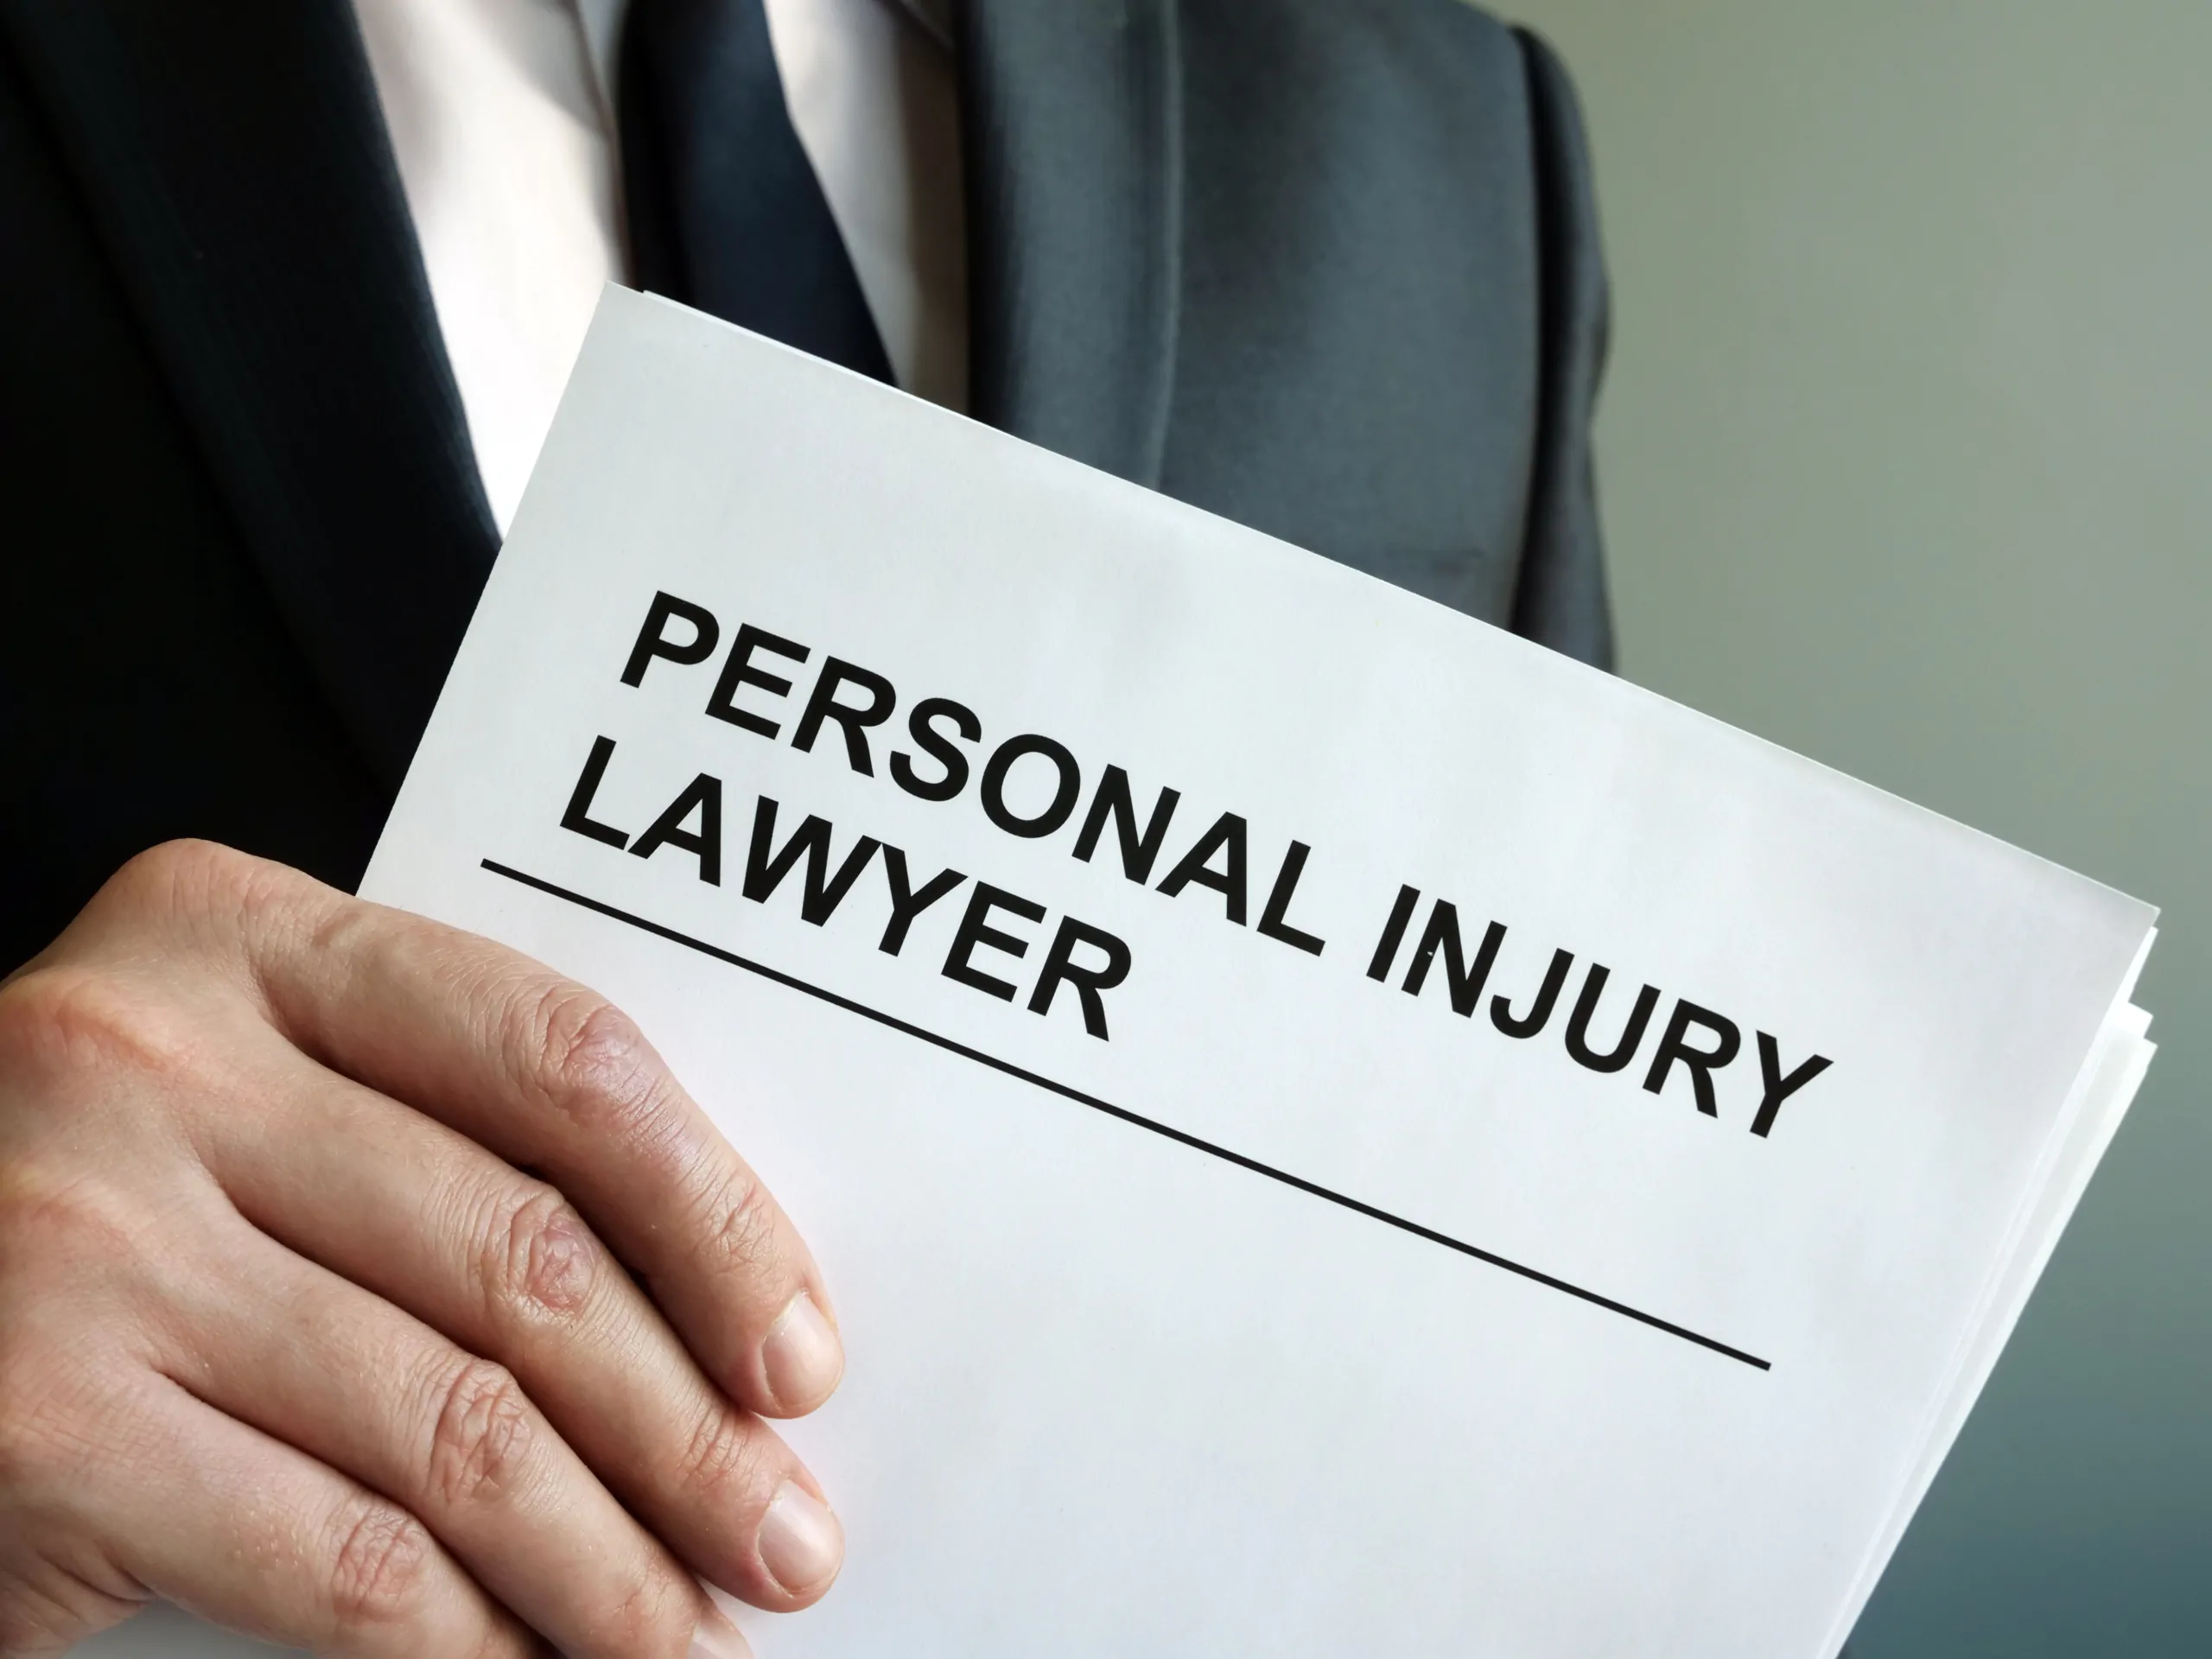 5 Benefits You Could Get from Hiring a Personal Injury Attorney in Indiana